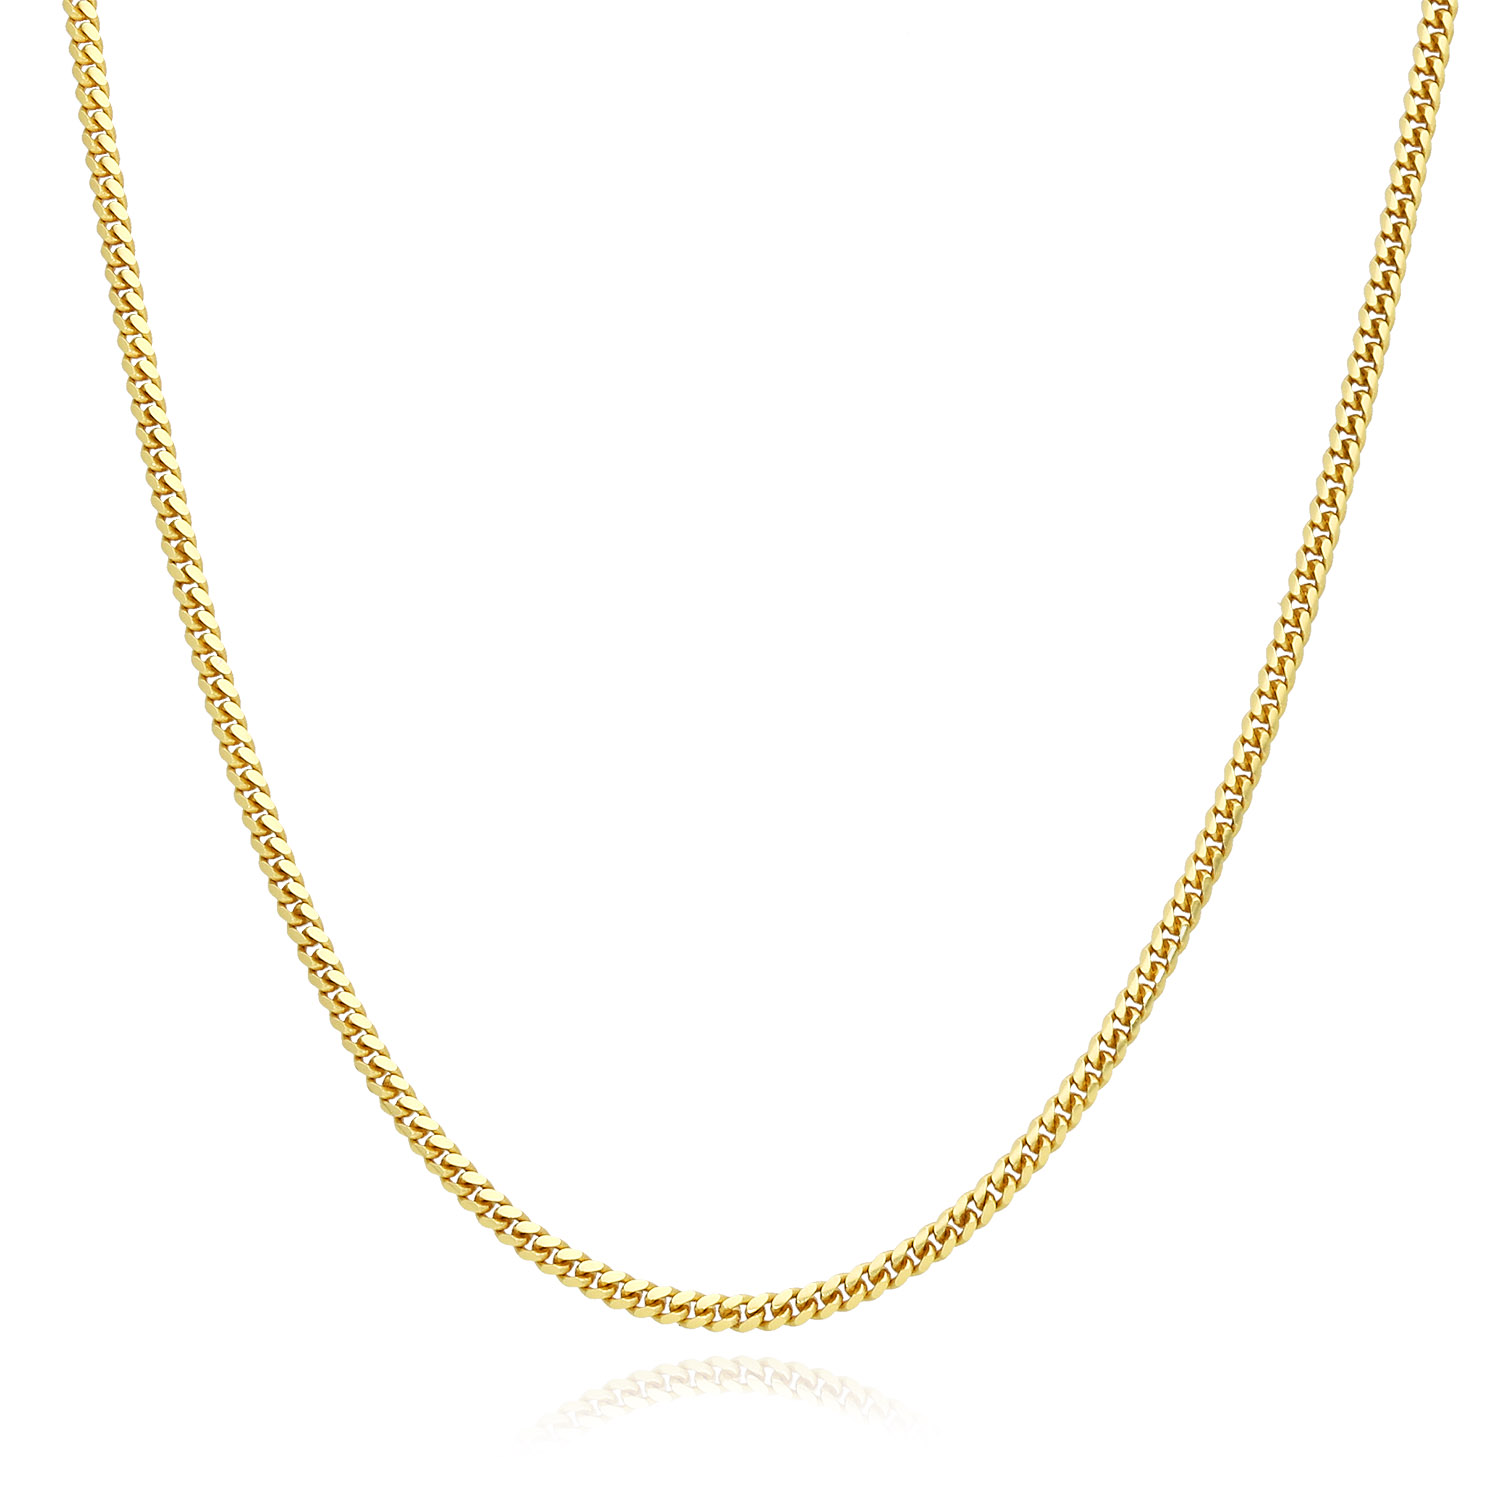 Solid 18K Yellow Gold Over Silver 2mm Miami Cuban Chain Necklace 16"-30" - 30"